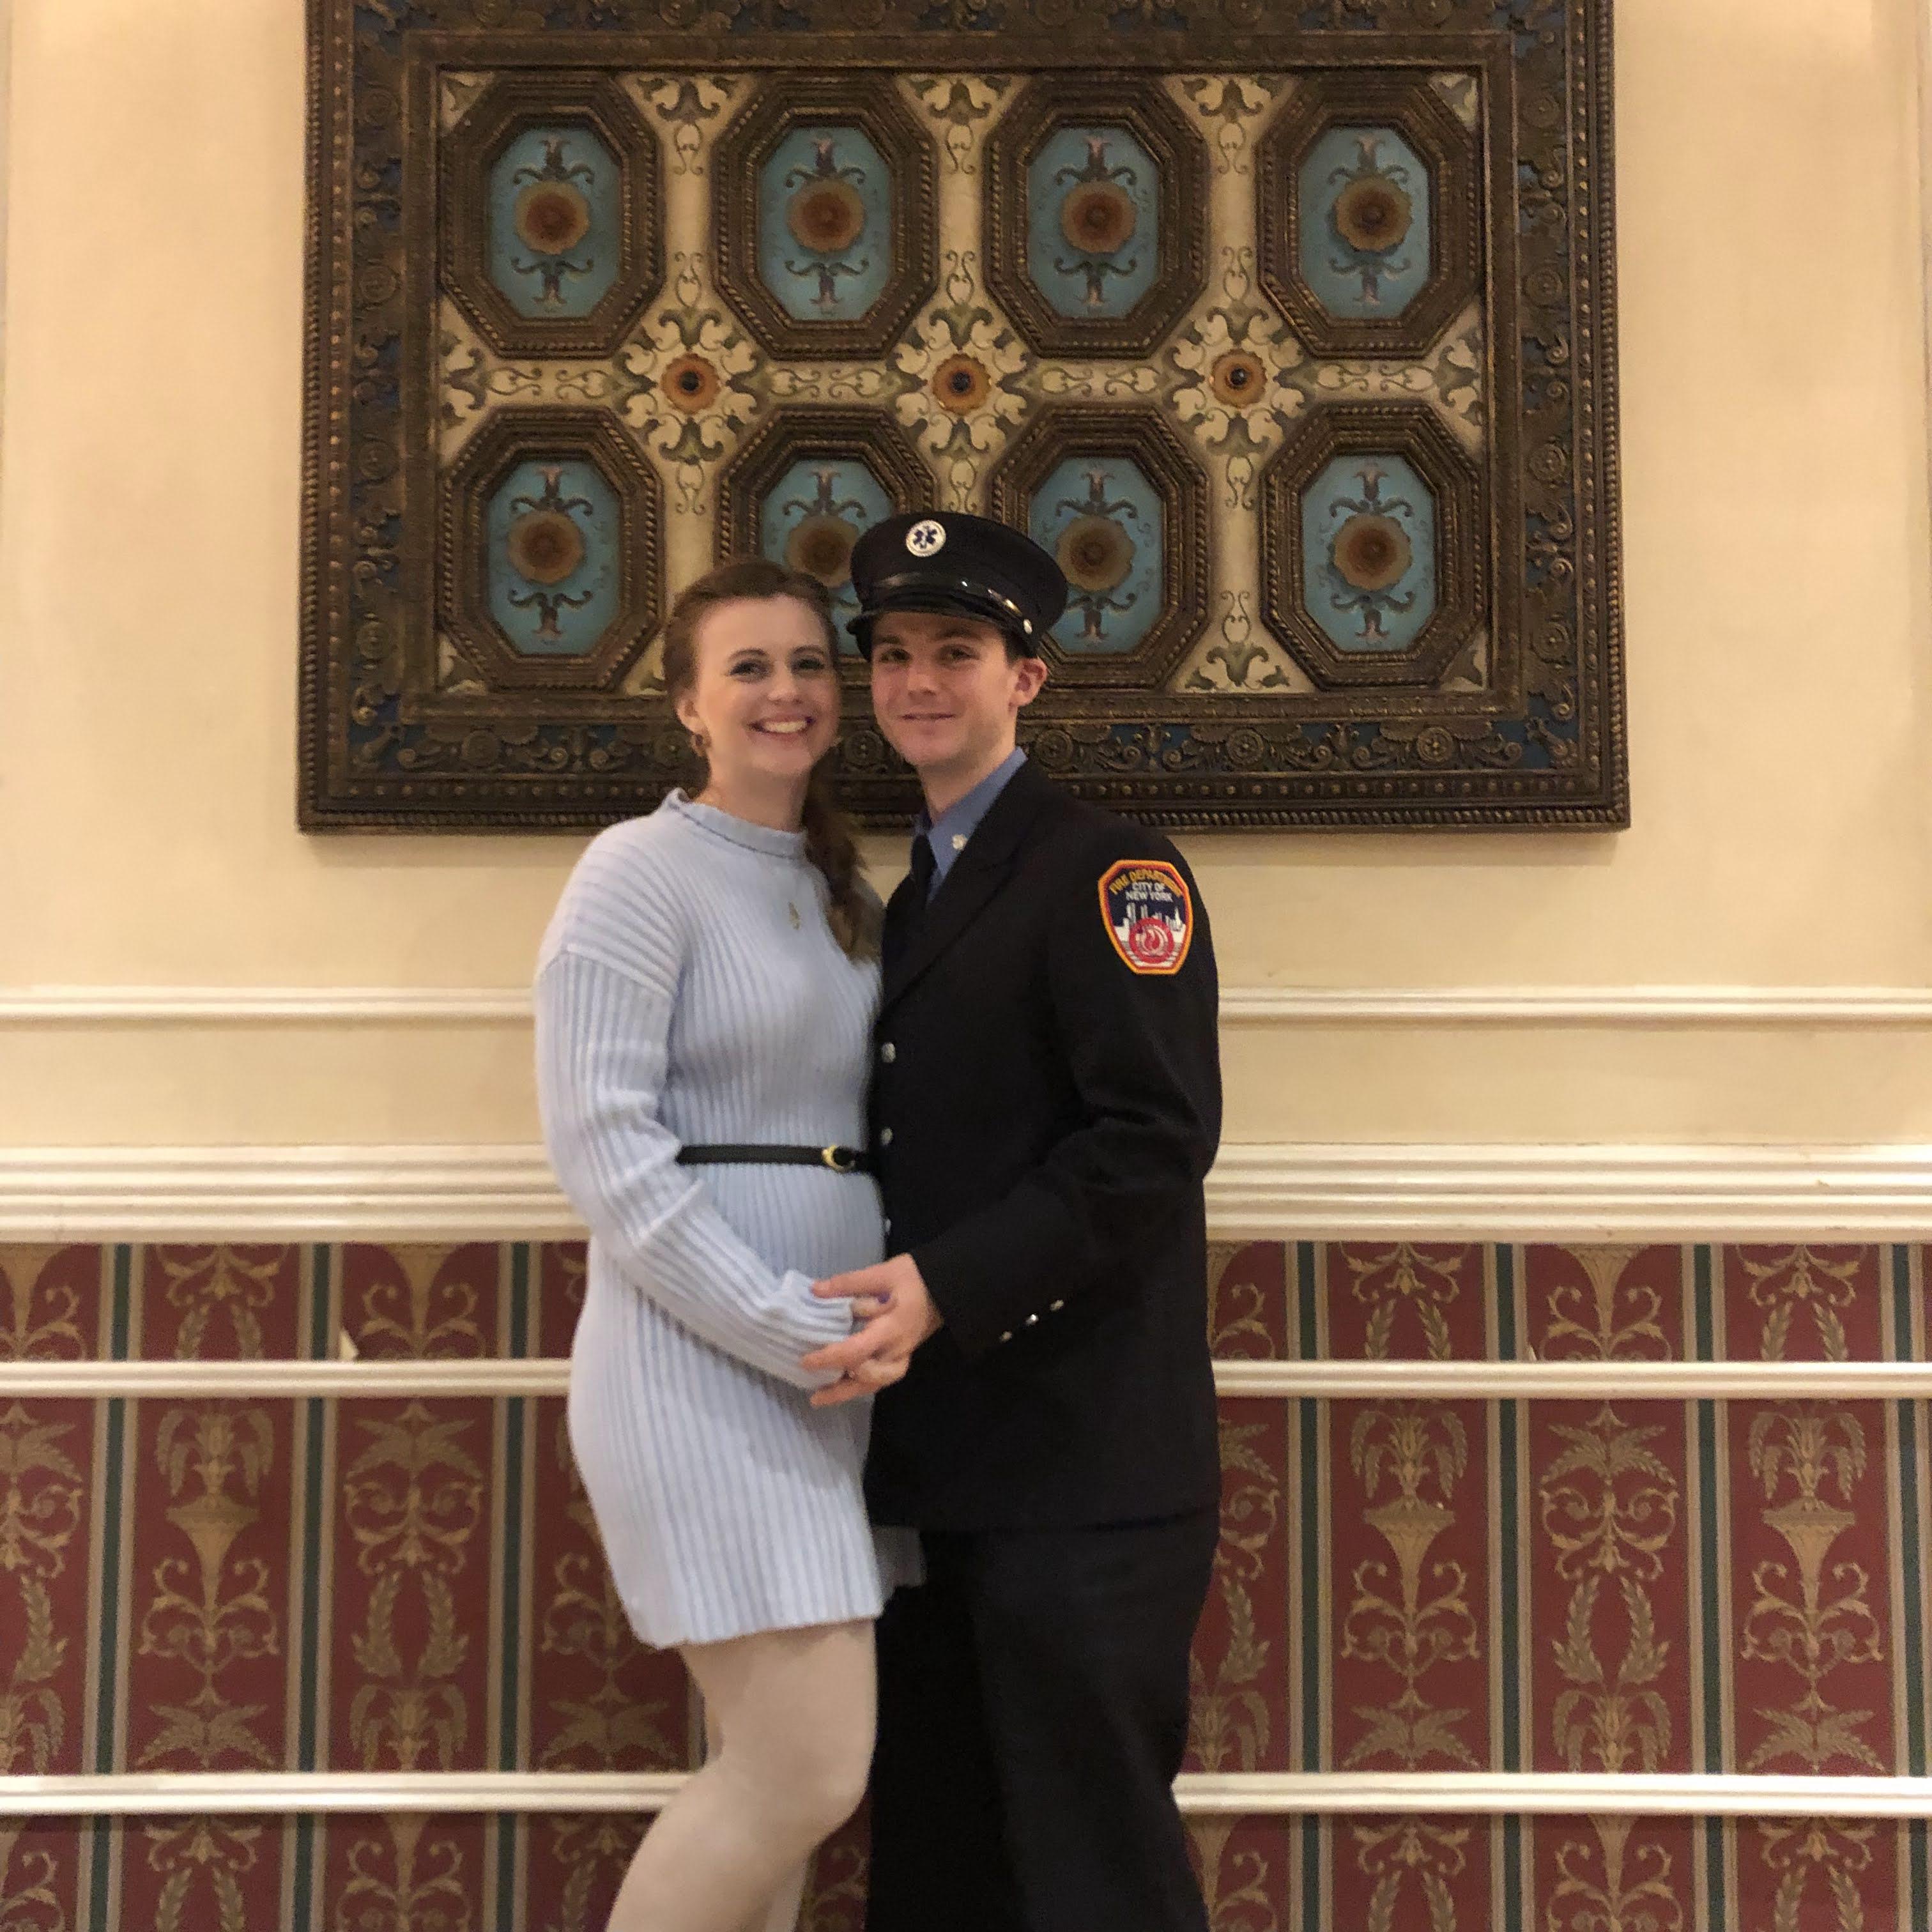 The day of Timo's graduation from the FDNY EMS Academy